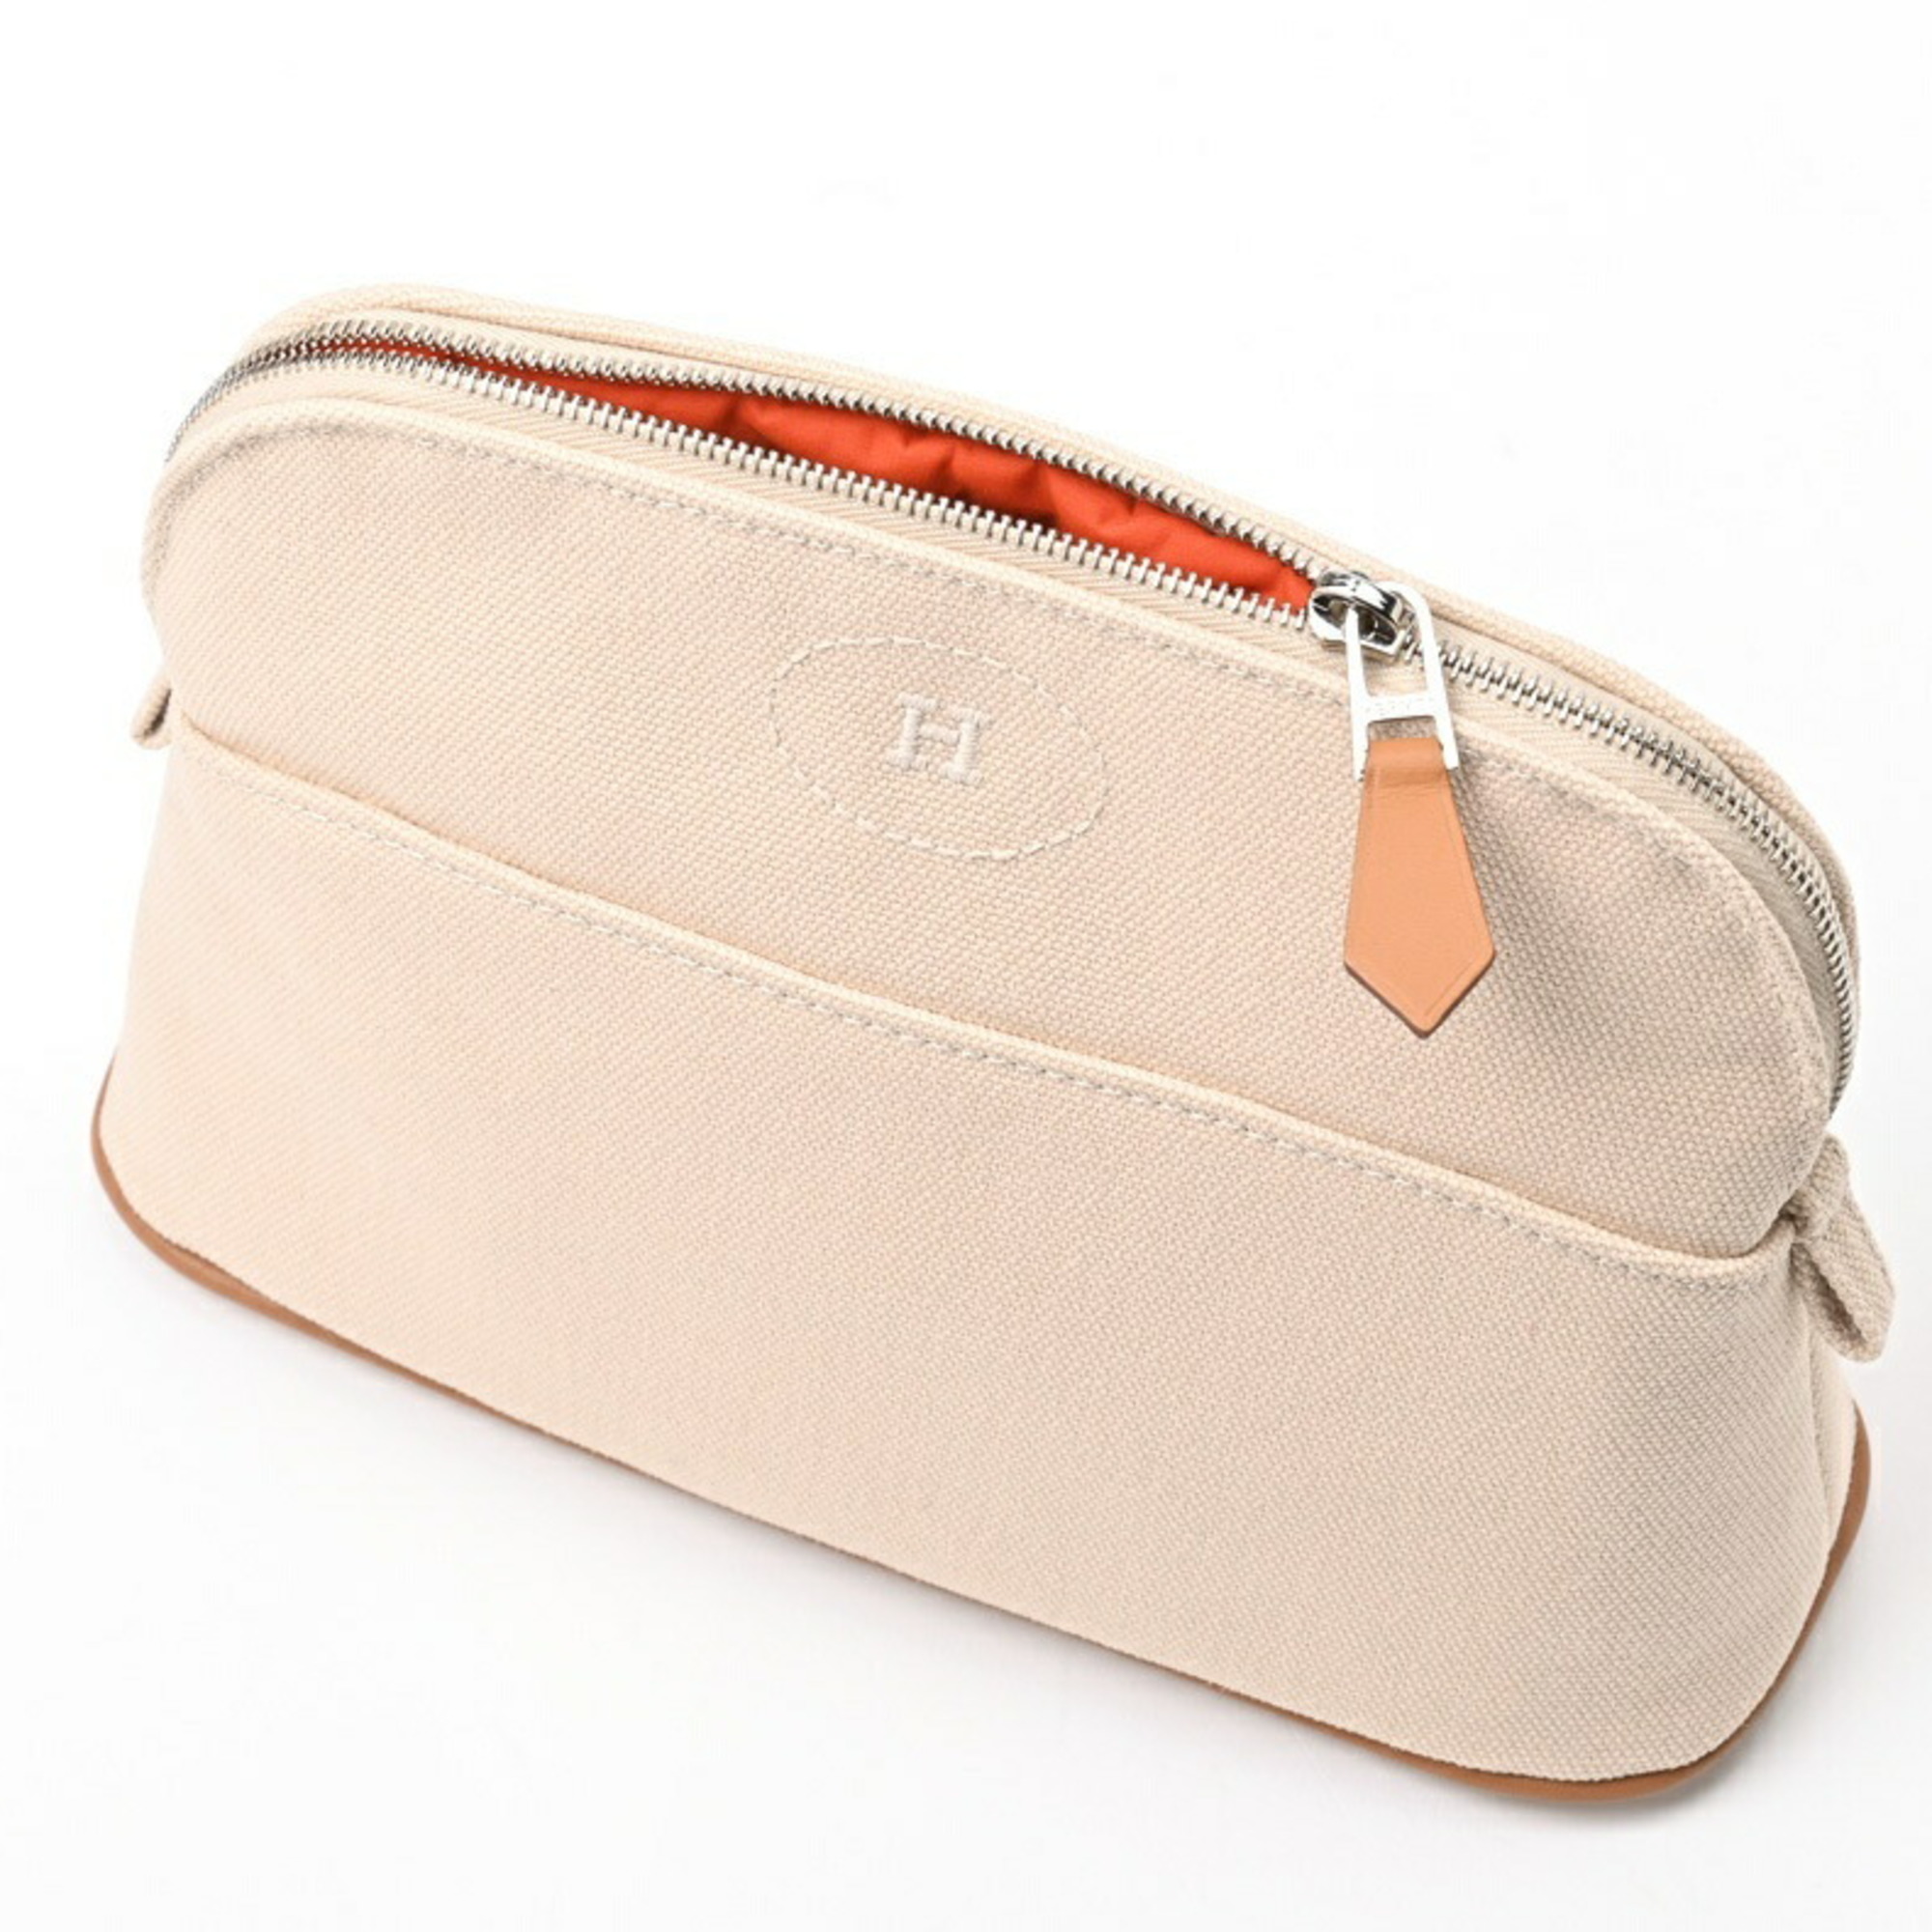 Hermes HERMES Bolide Pouch PM 20 Canvas Leather Beige S-155731